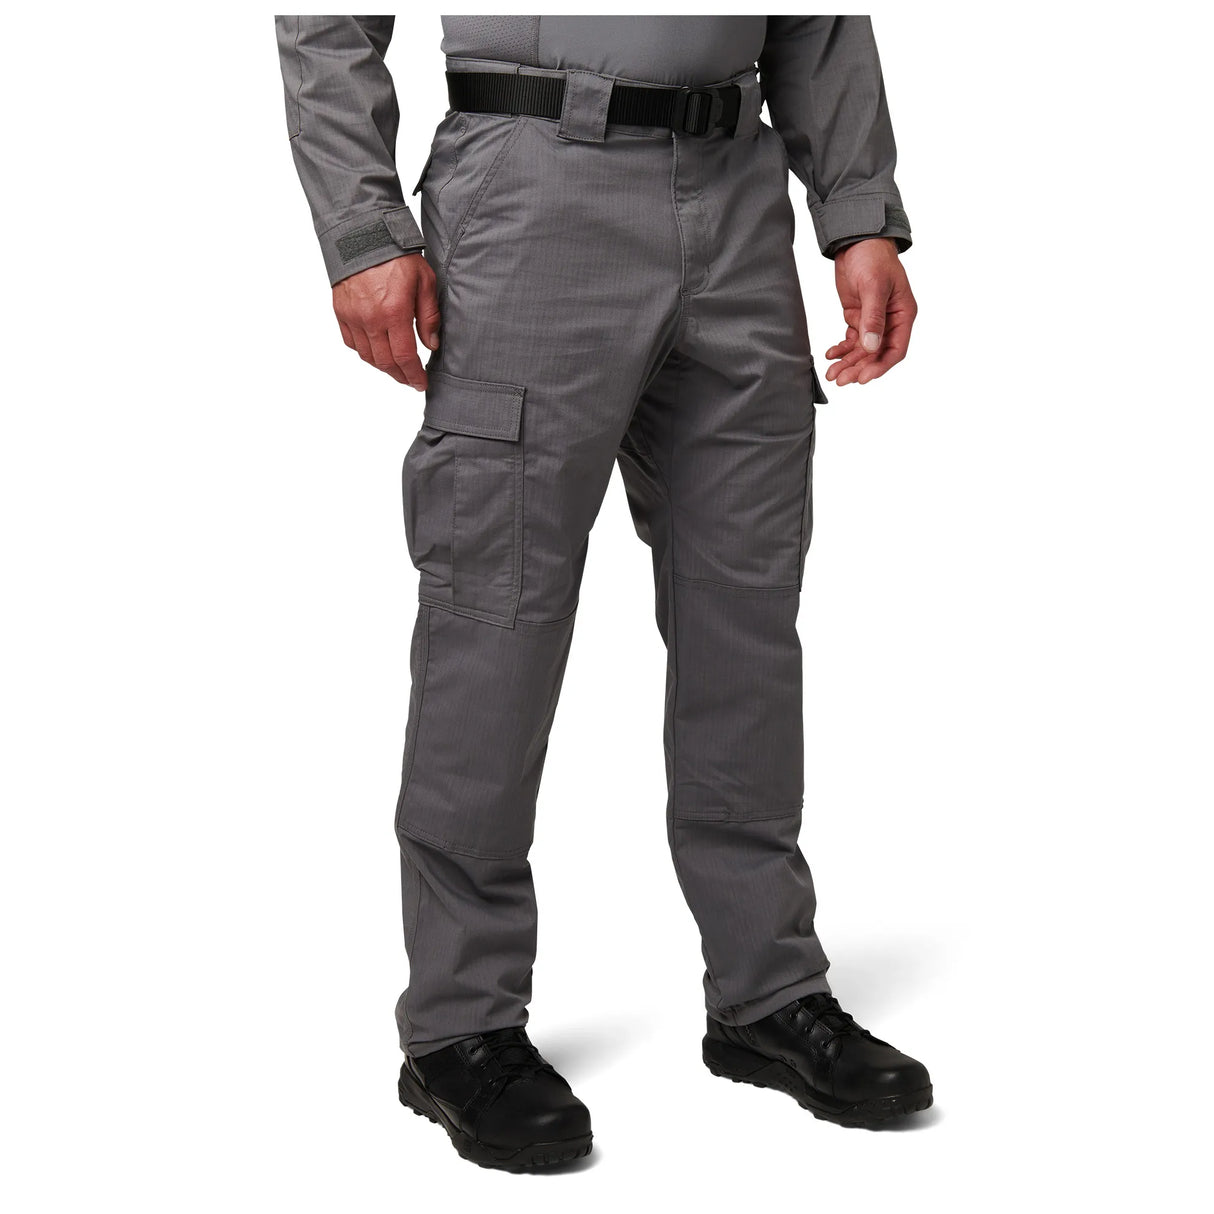 Alt: 5.11 TDU® Pant - Tactical design with Flex-Tac® fabric, reinforced knees, tunnel waistband, large cargo pockets with TacTec™ compatibility. (125)